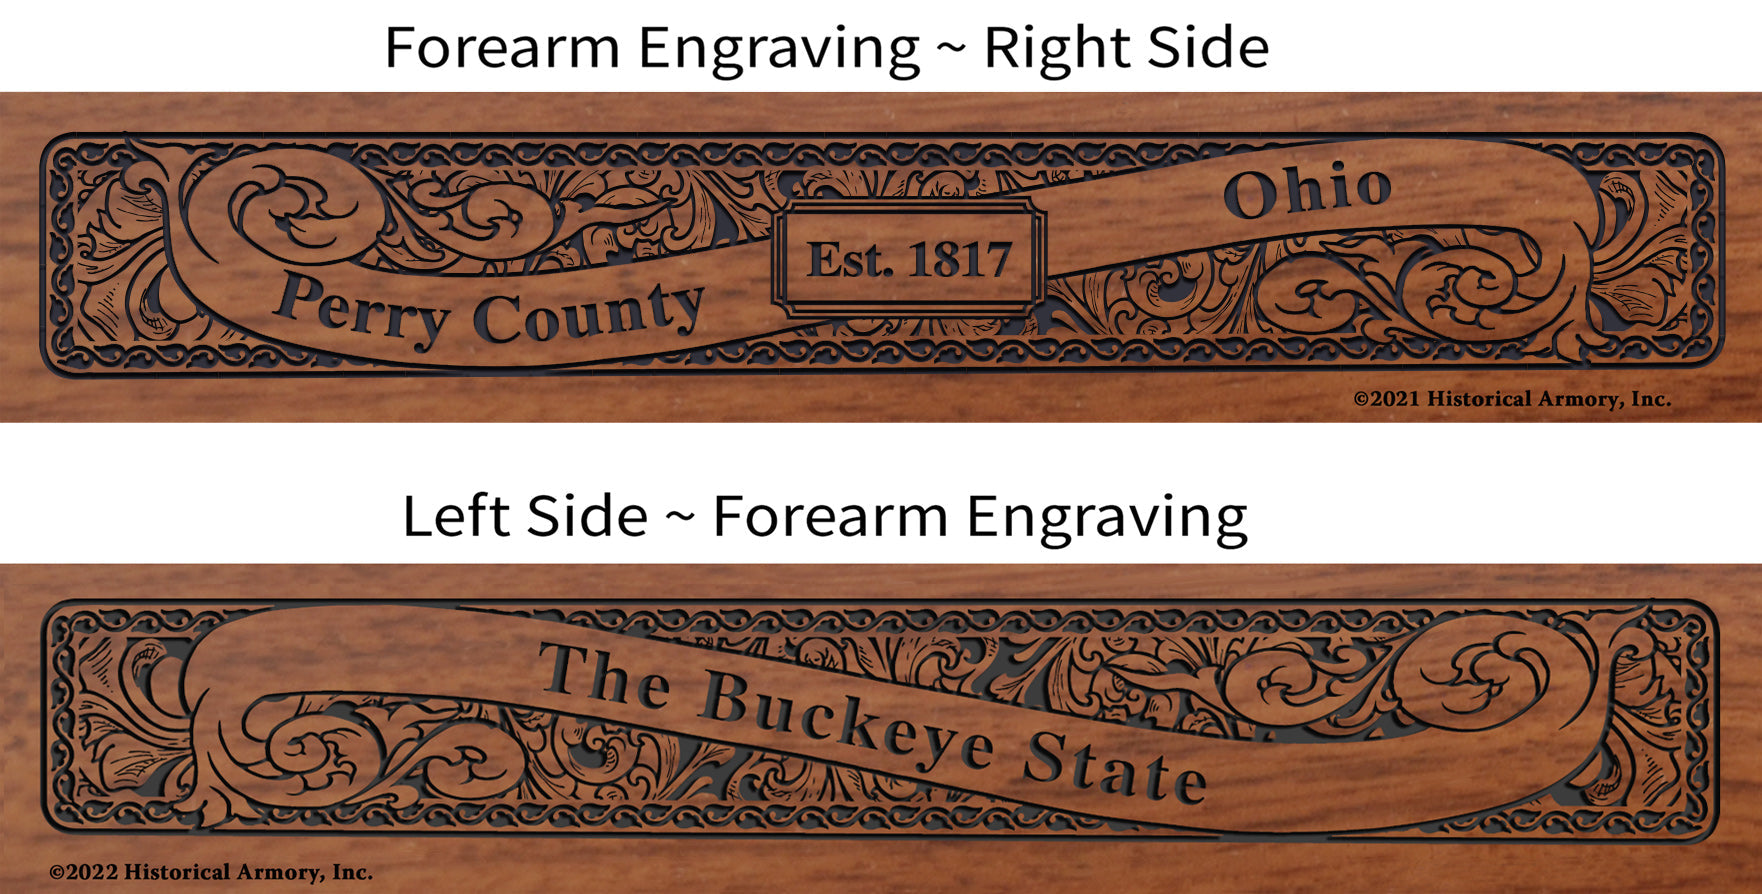 Perry County Ohio Engraved Rifle Forearm